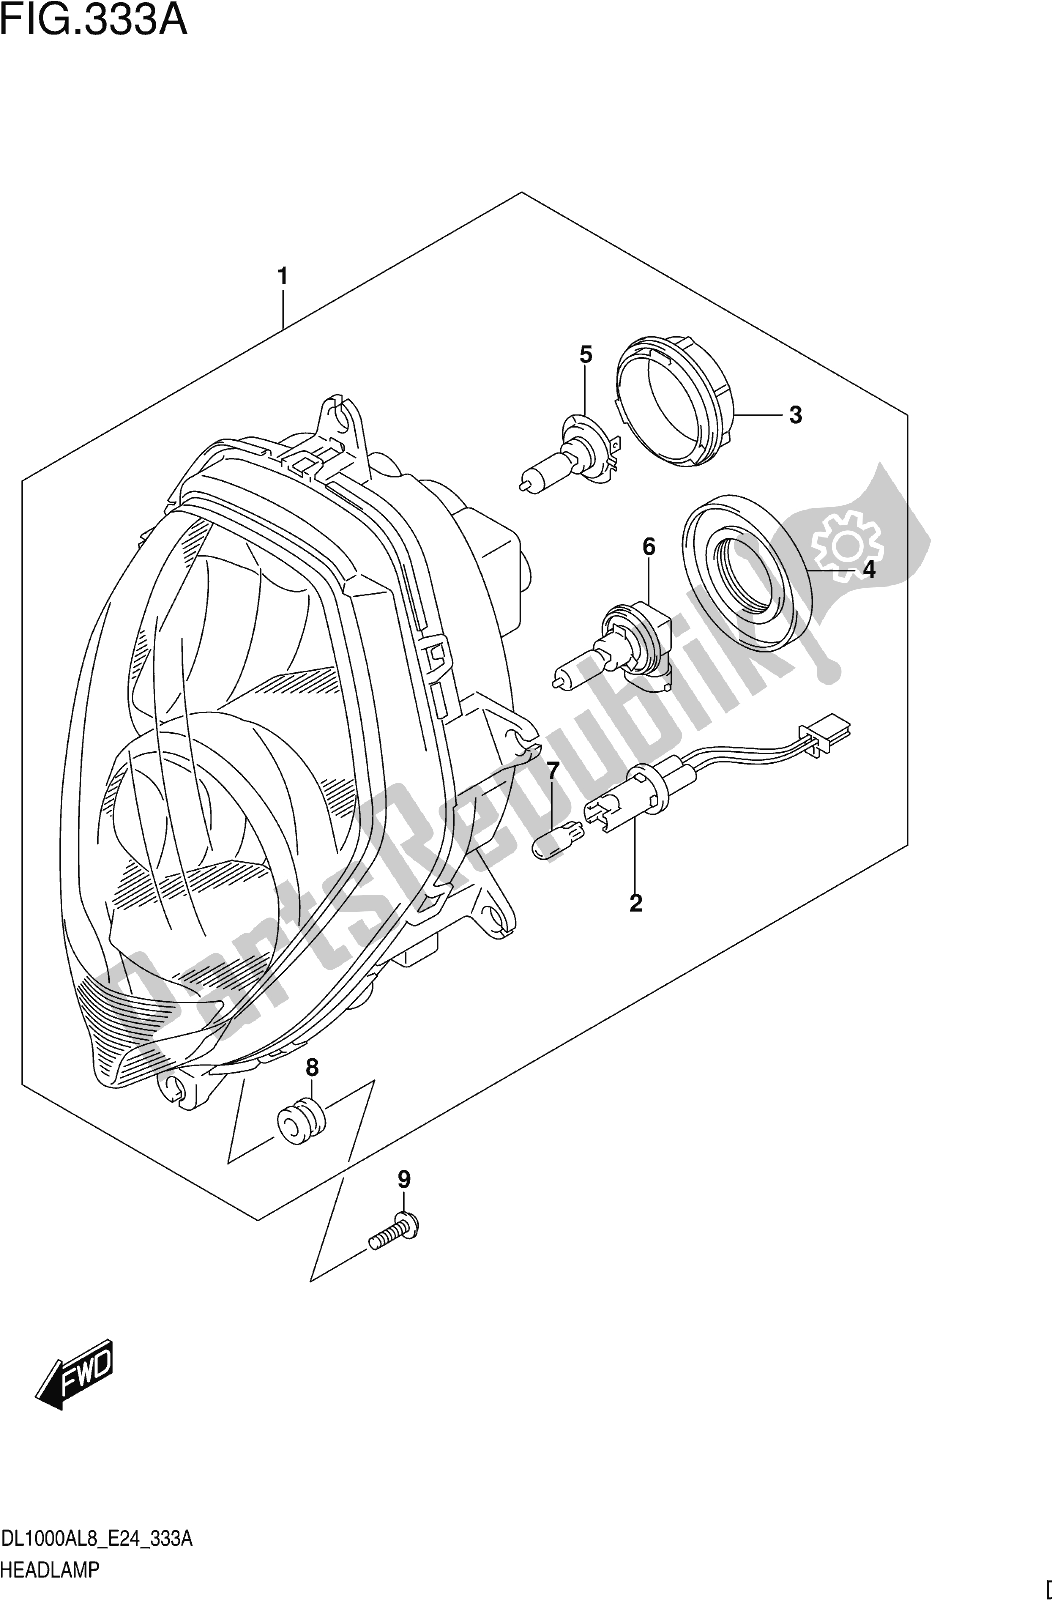 All parts for the Fig. 333a Headlamp of the Suzuki DL 1000 XA 2018